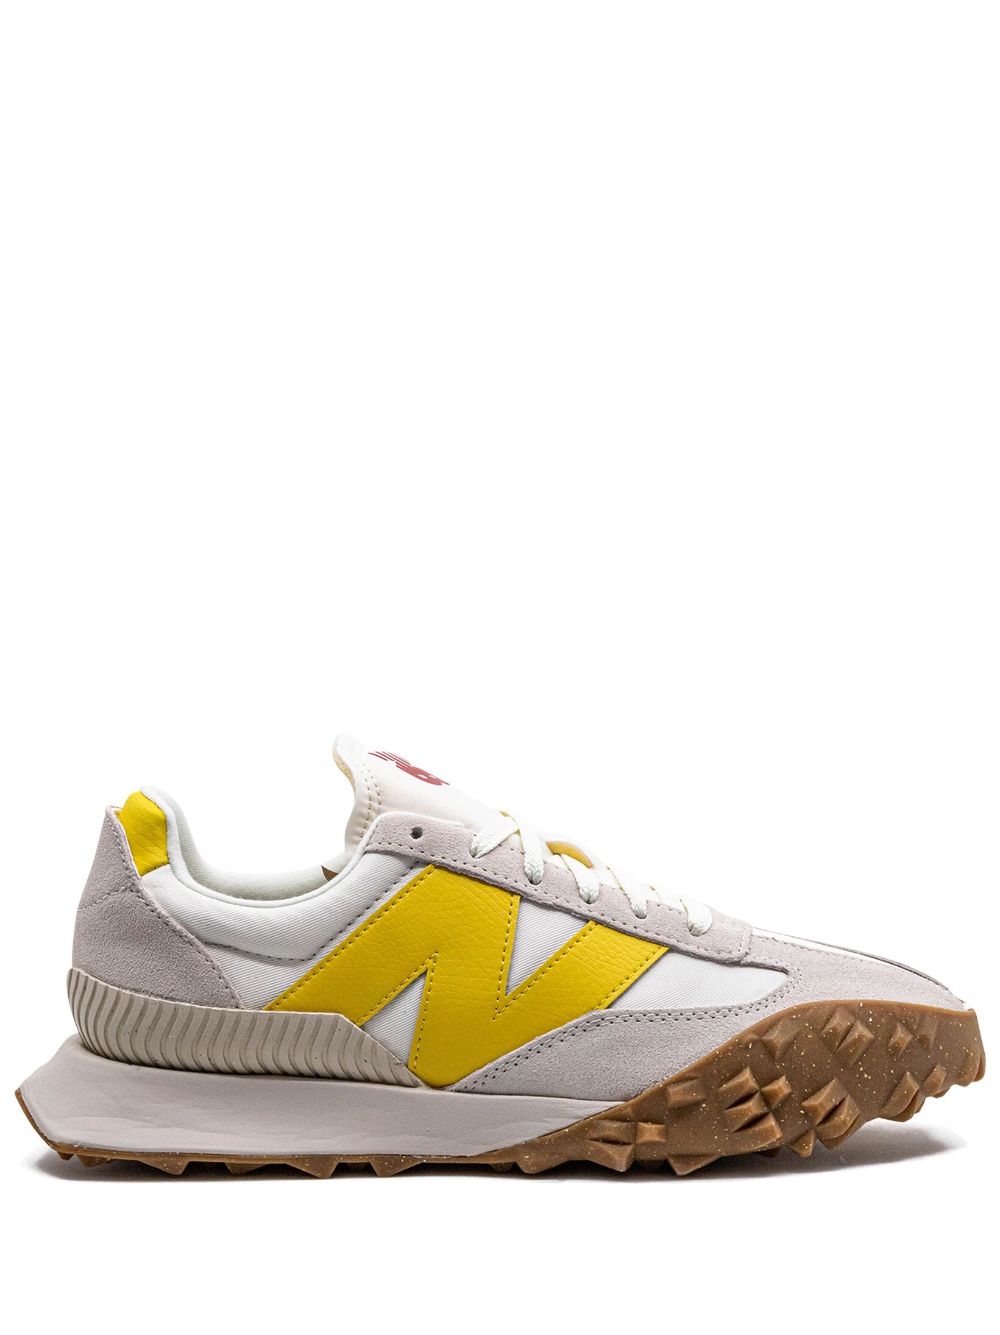 Image 1 of New Balance XC-72 low-top sneakers